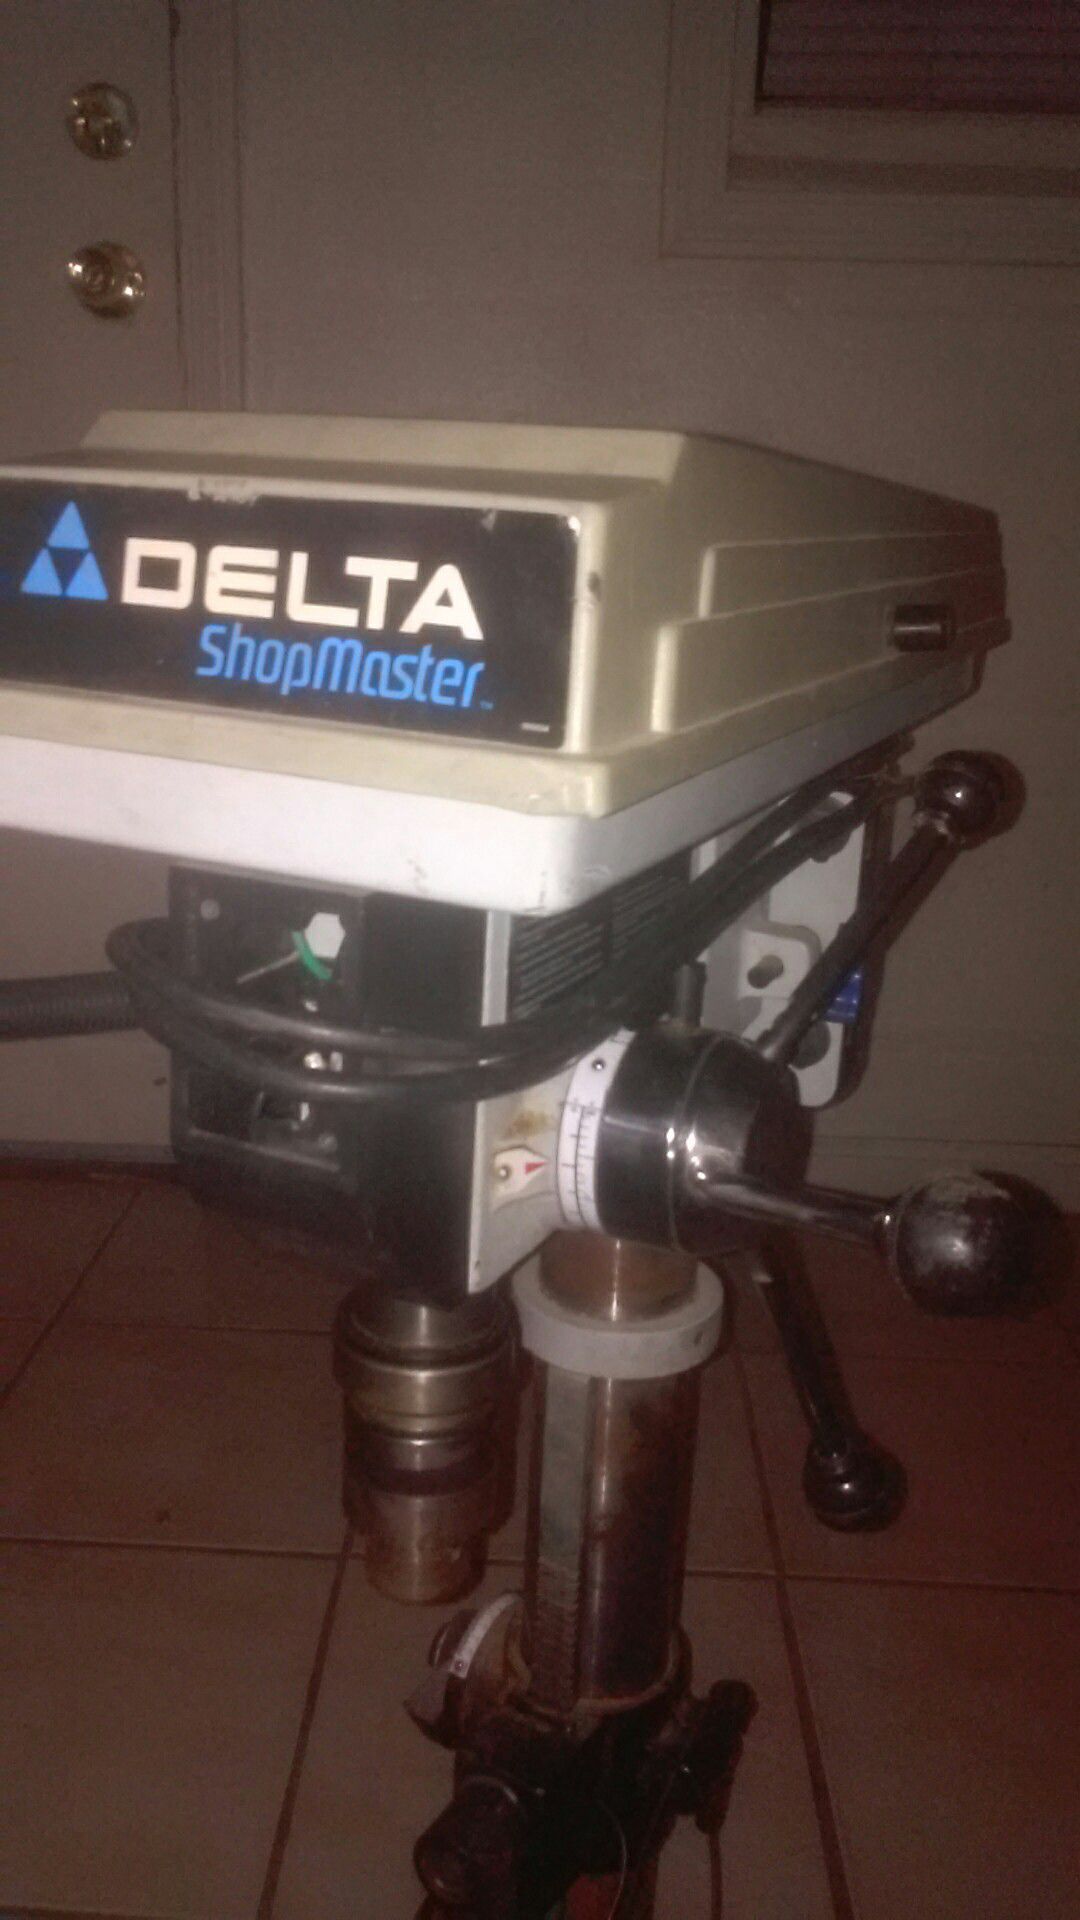 10 inch Delta Shopmaster drill press works great three speeds just needs a tray that's all